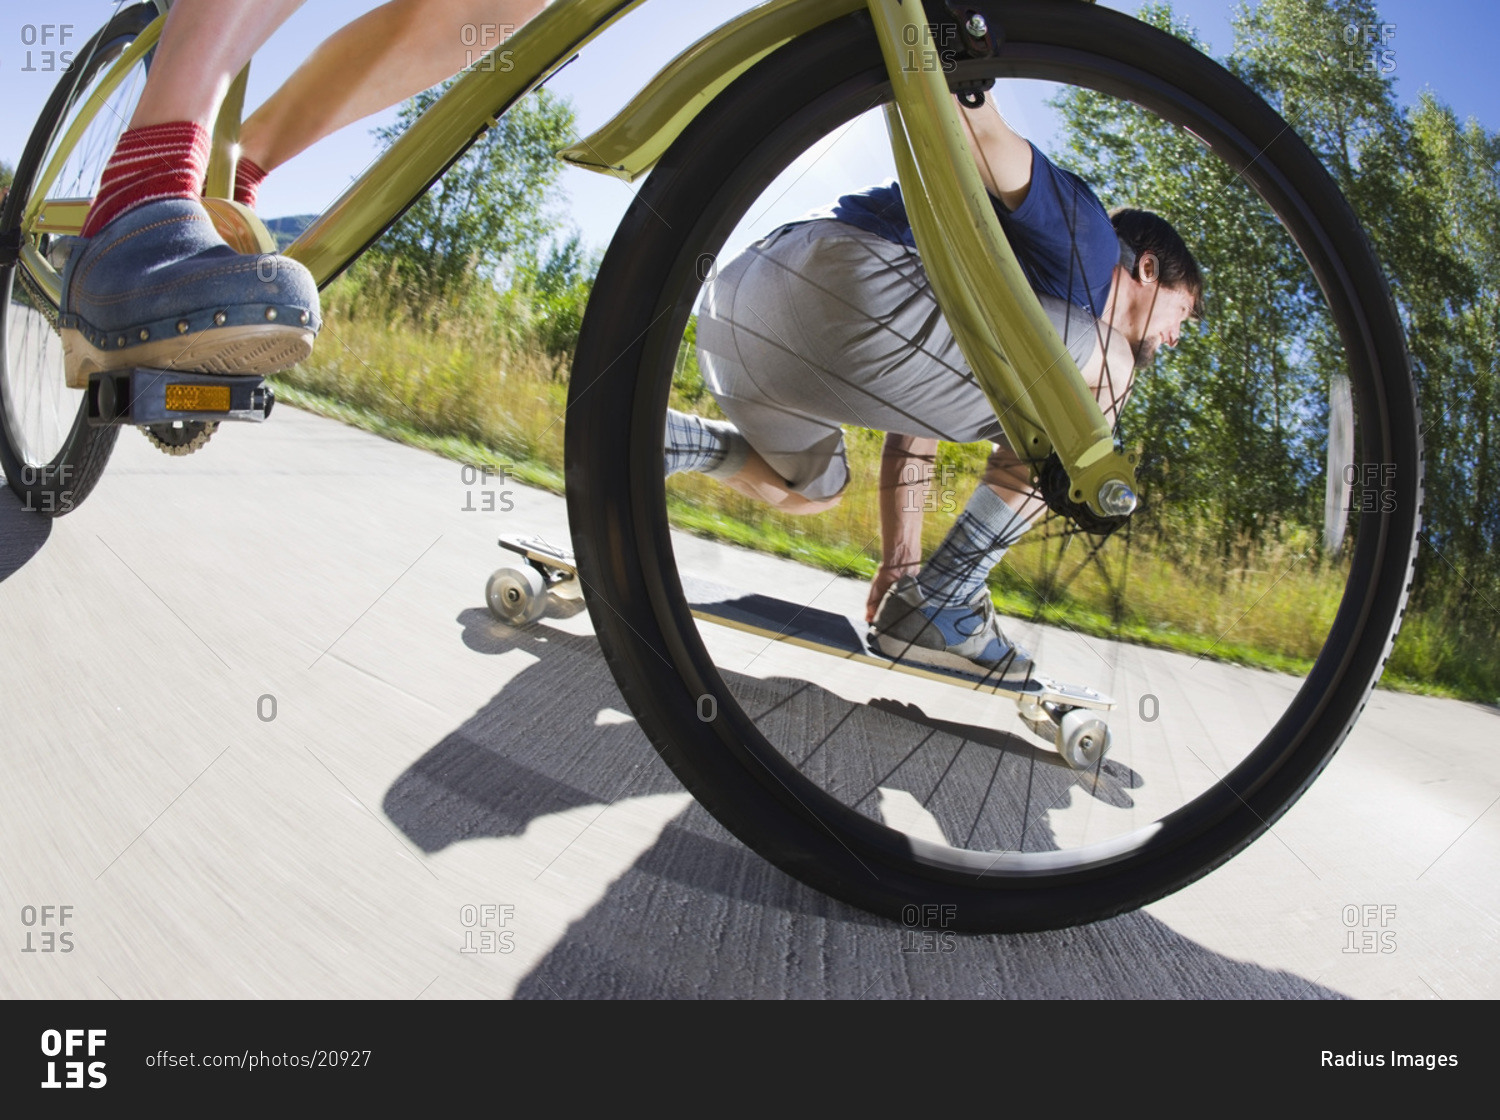 Woman Riding a Bicycle and Man Riding a Skateboard on a Bike Path, Steamboat Springs, Routt County, Colorado, USA